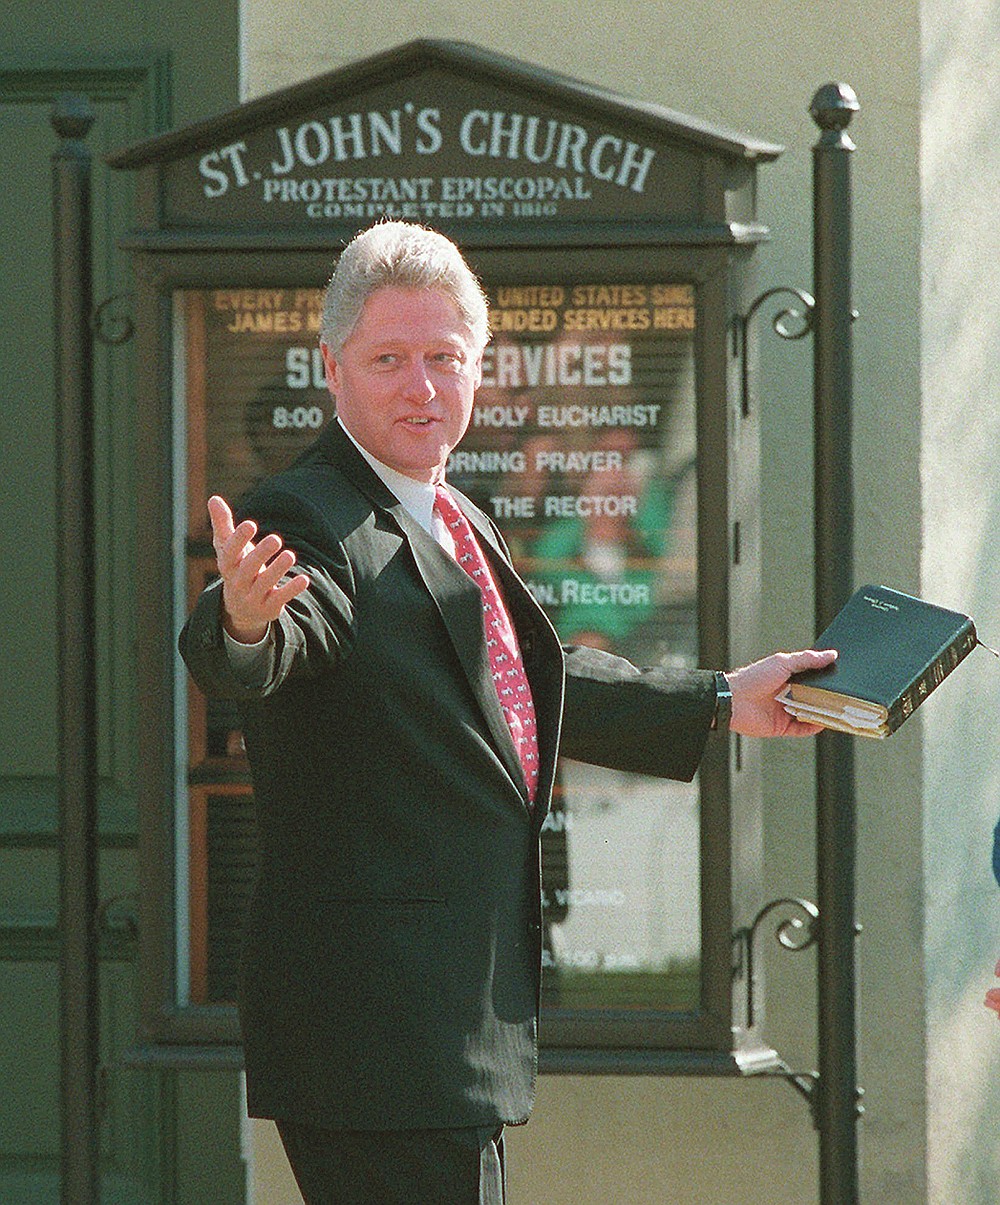 FILE - In this Sunday, March 24, 1996 file photo, President Bill Clinton leaves St. John's Church after attending services in Washington. Clinton attended without first lady Hillary Rodham Clinton, who opened an eight-day goodwill tour through Europe Sunday. (AP Photo/Ron Edmonds)